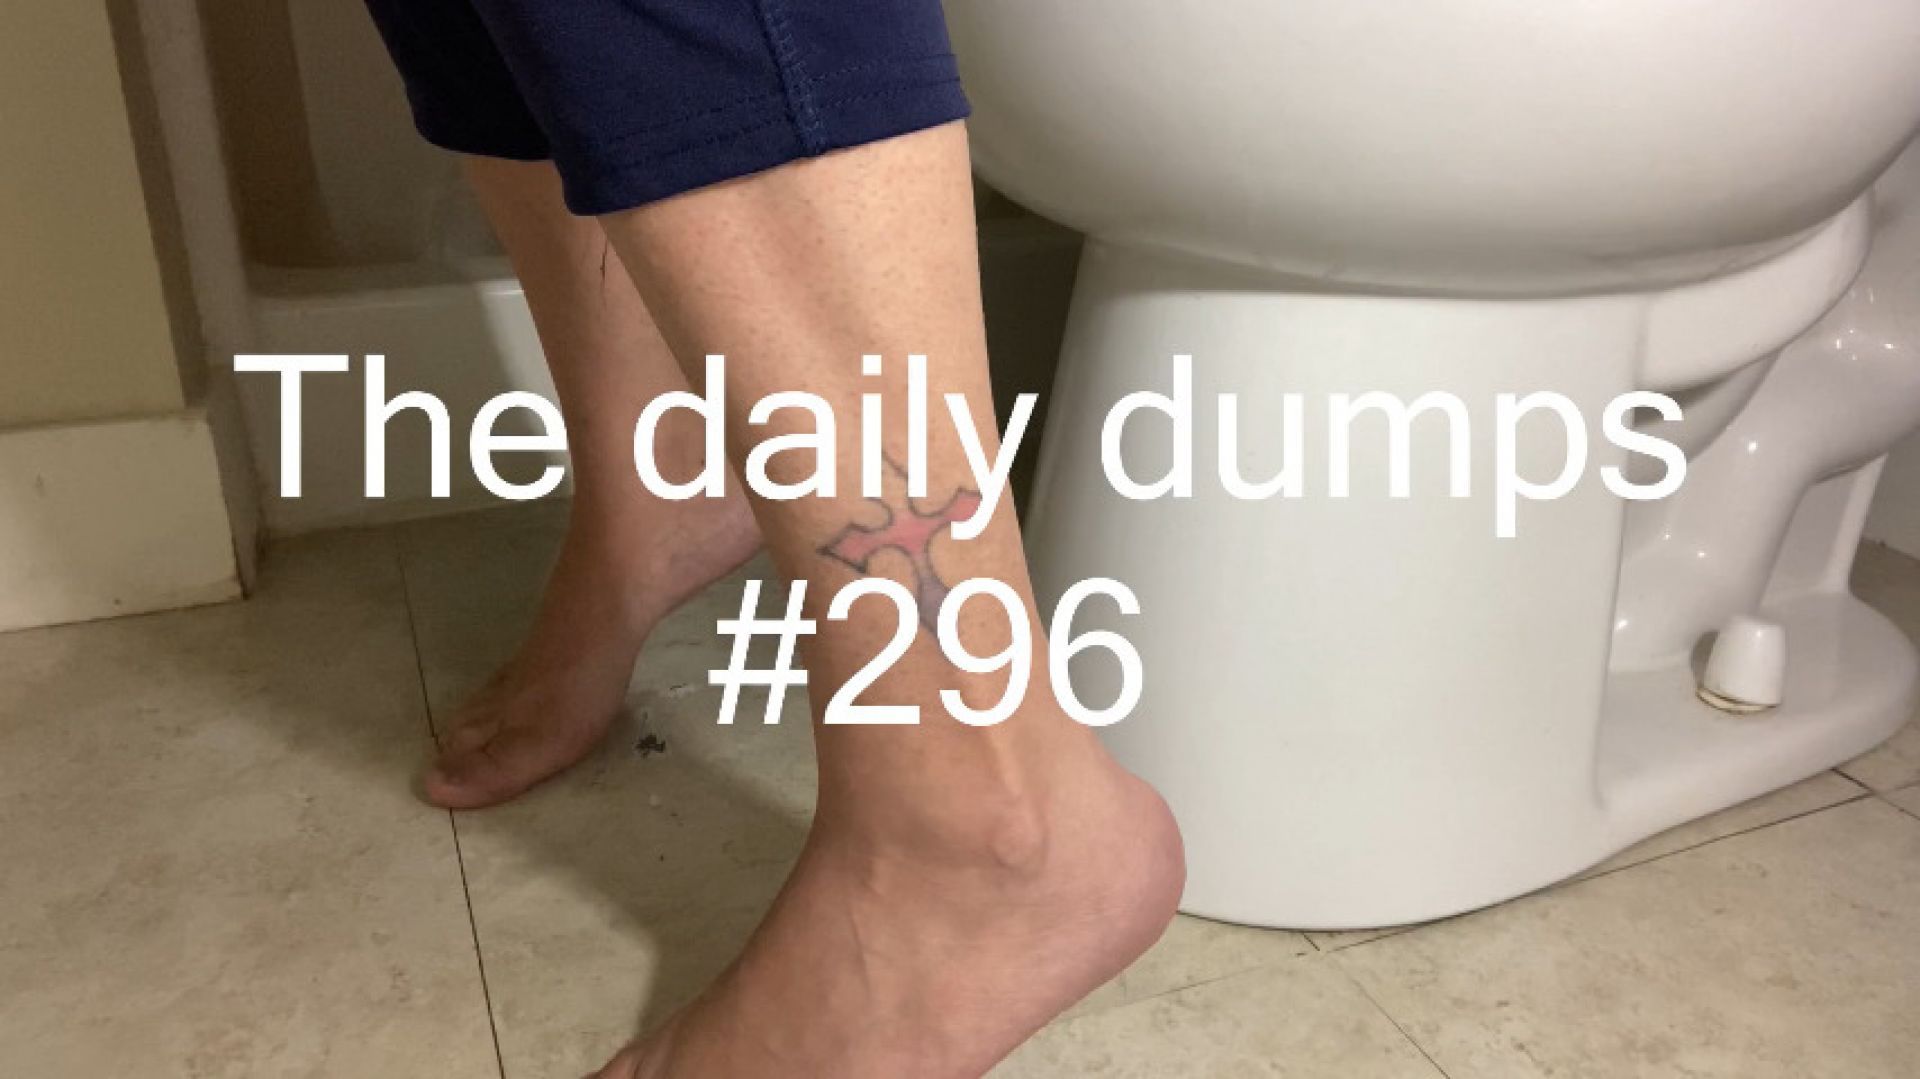 The daily dumps #296